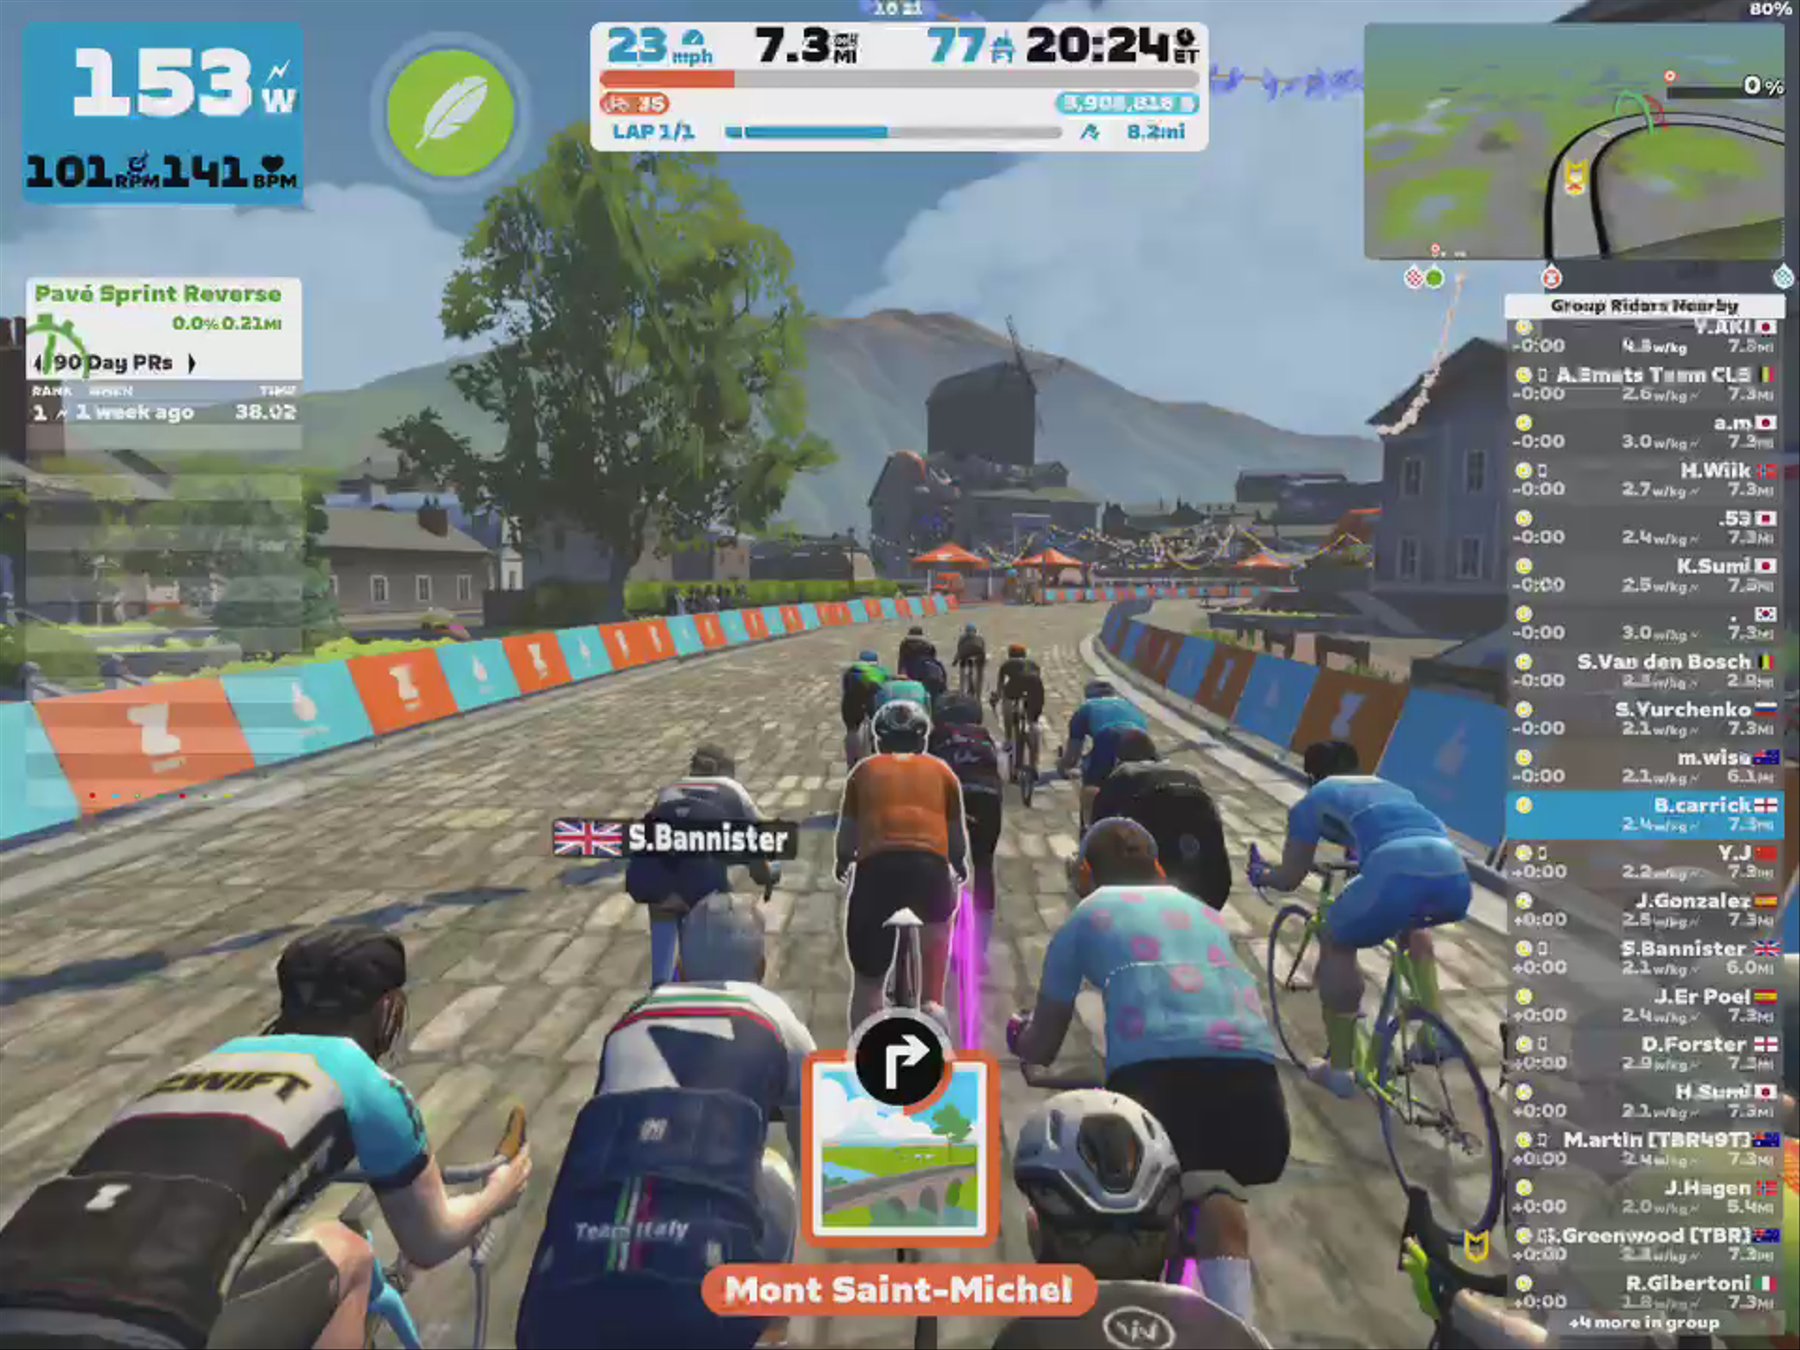 Zwift - Group Ride: Zwift Racing League | WTRL - Group Recon Ride (TBR) (D) on R.G.V. in France